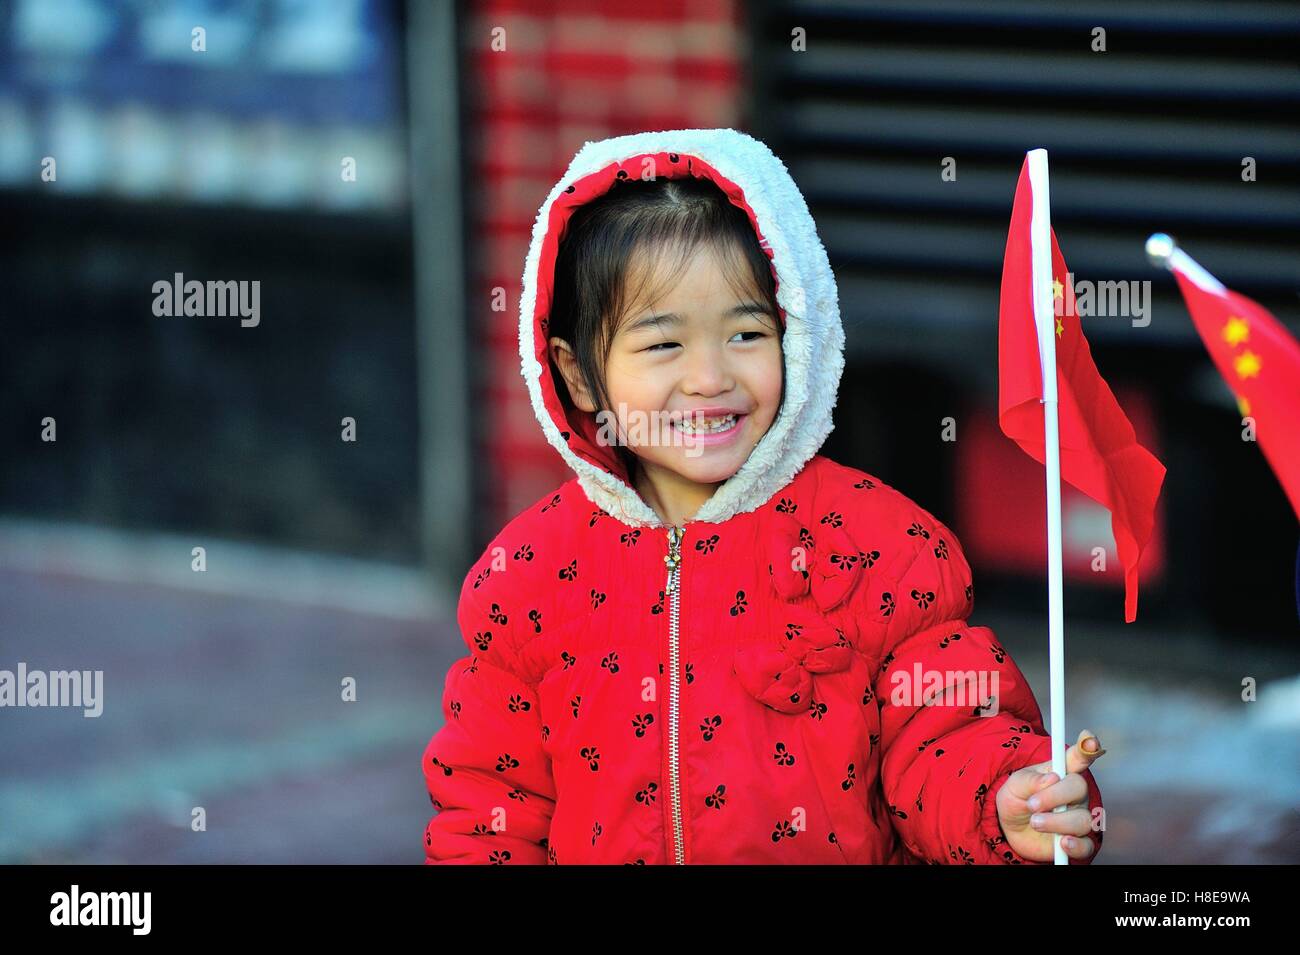 Little girl waving a Chinese flag as she cheered on athletes competing in the 2016 Chicago Marathon. Chicago, Illinois, USA. Stock Photo